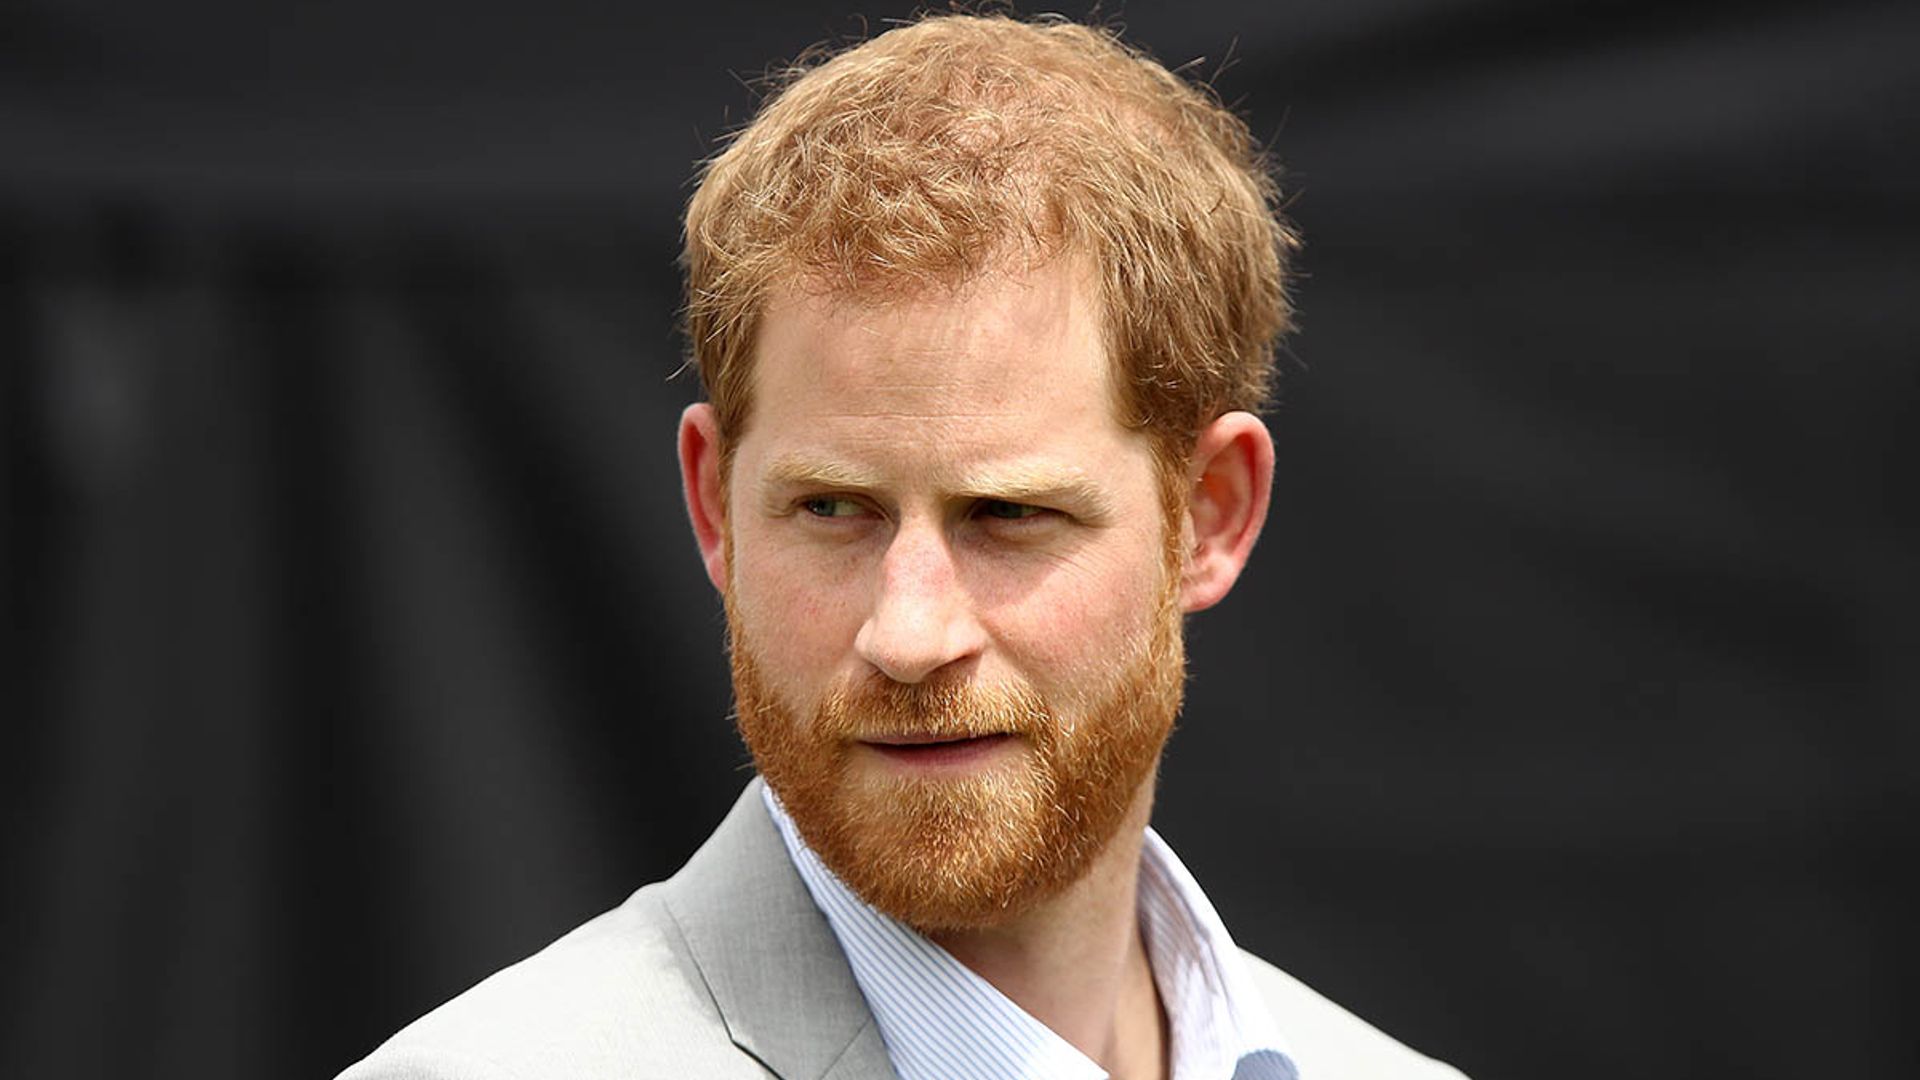 Prince Harry's handsome cousin makes Tatler's most eligible list - see the photo